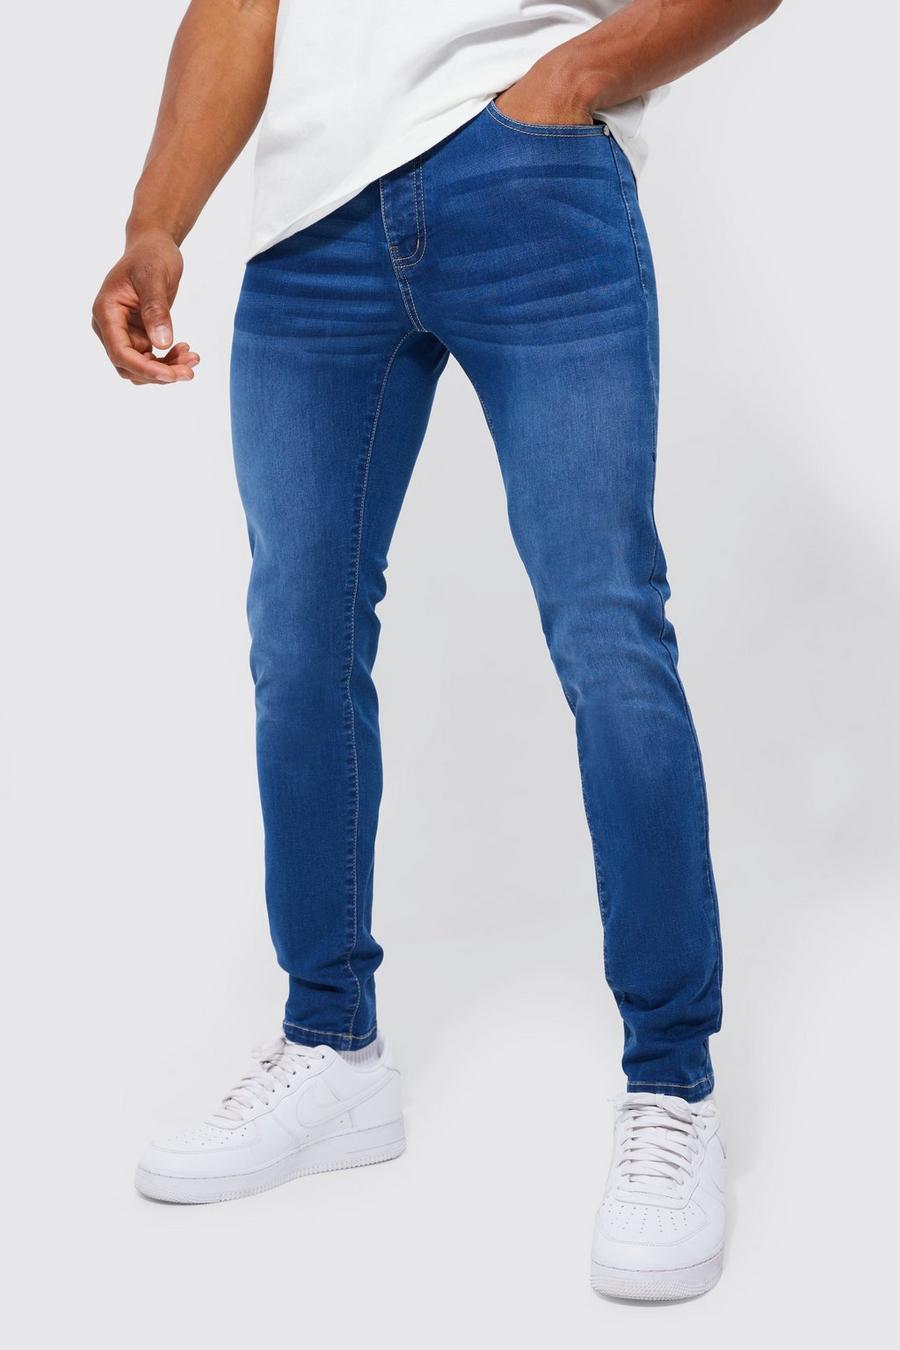 Jeans Stretch Skinny Fit, Mid blue